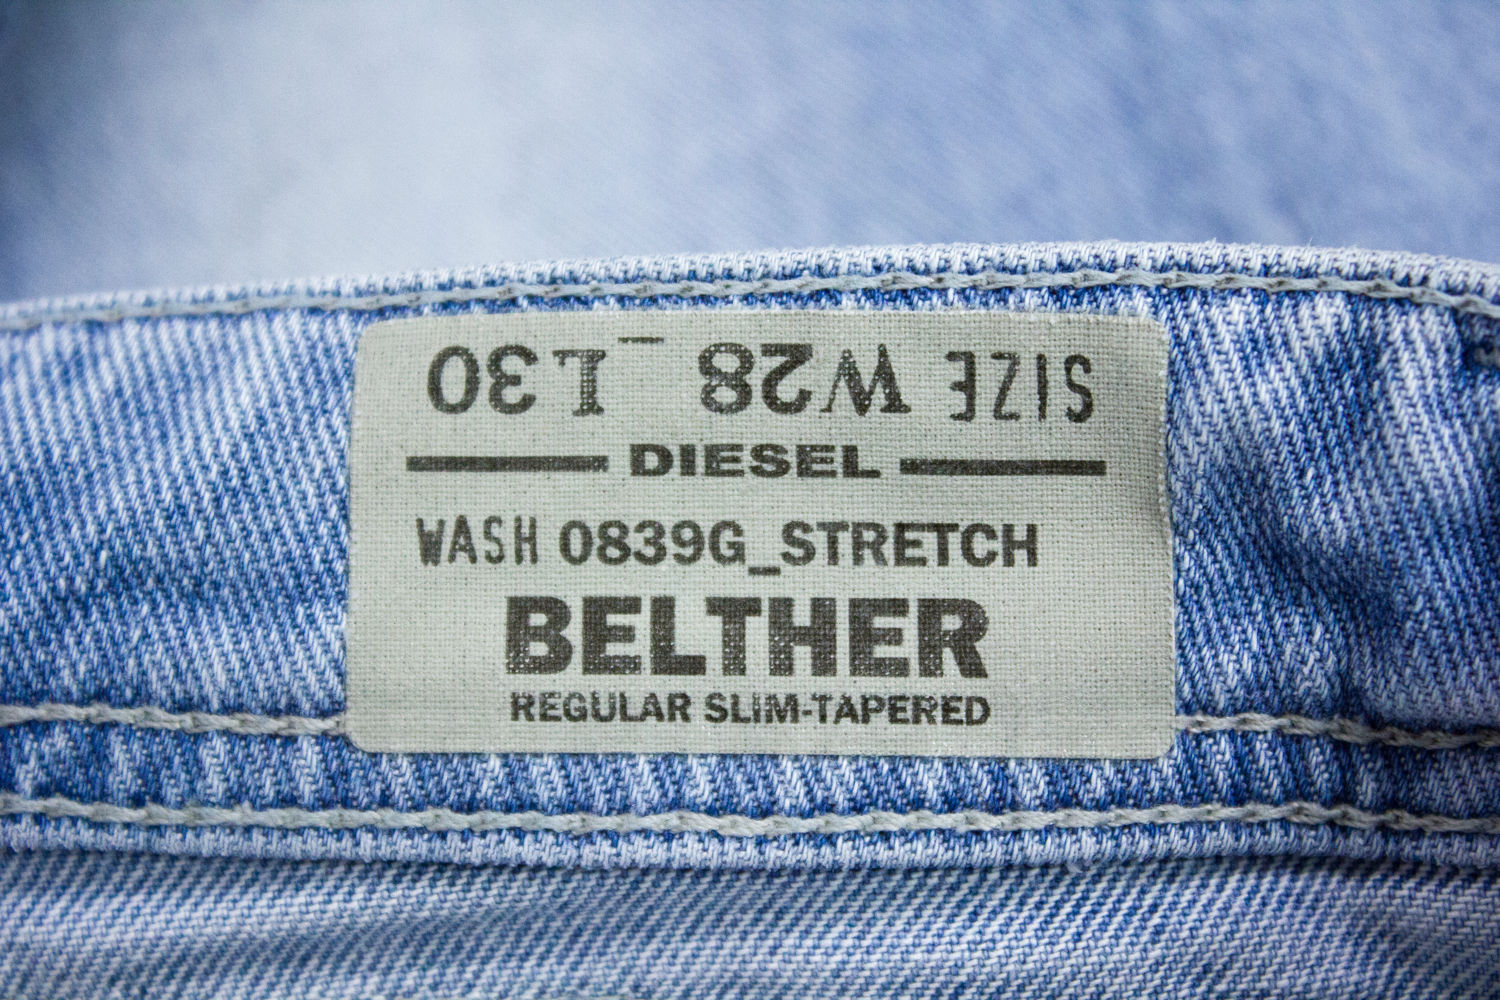 DIESEL BELTHER REGULAR SLIM TAPERED JEANS, 28/30 - secondfirst